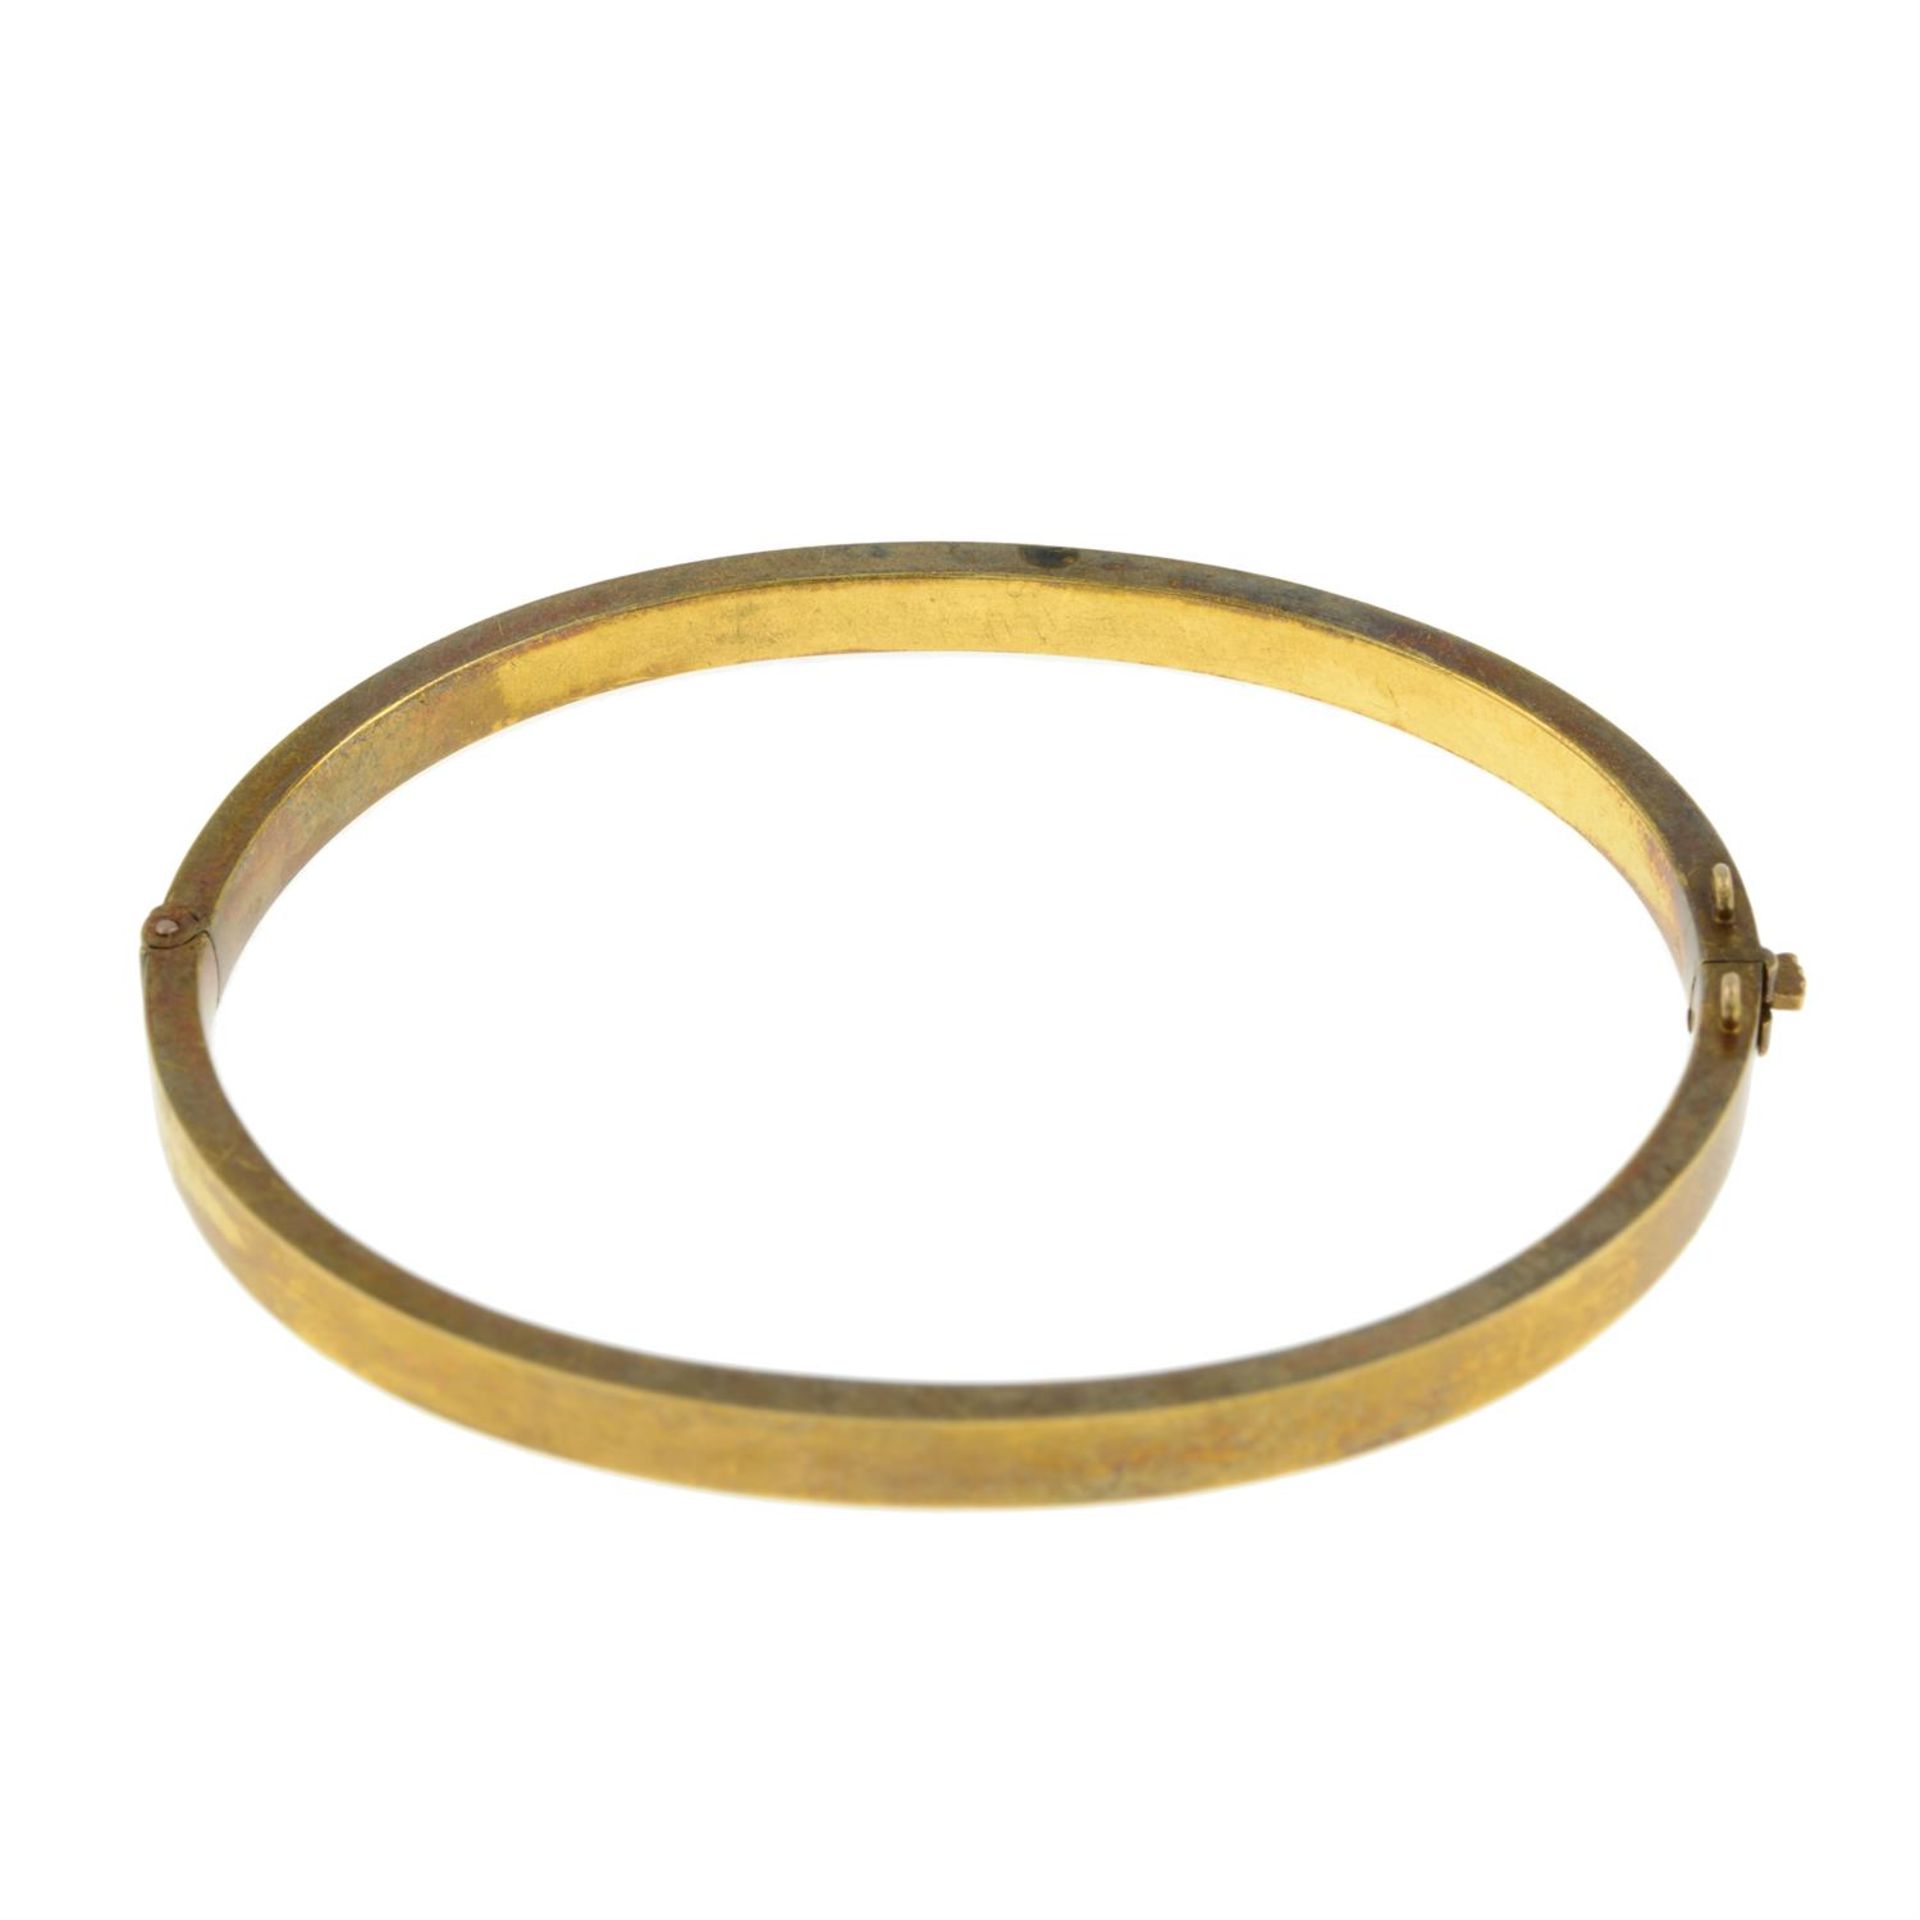 Late Victorian 15ct gold hinged bangle - Image 2 of 2